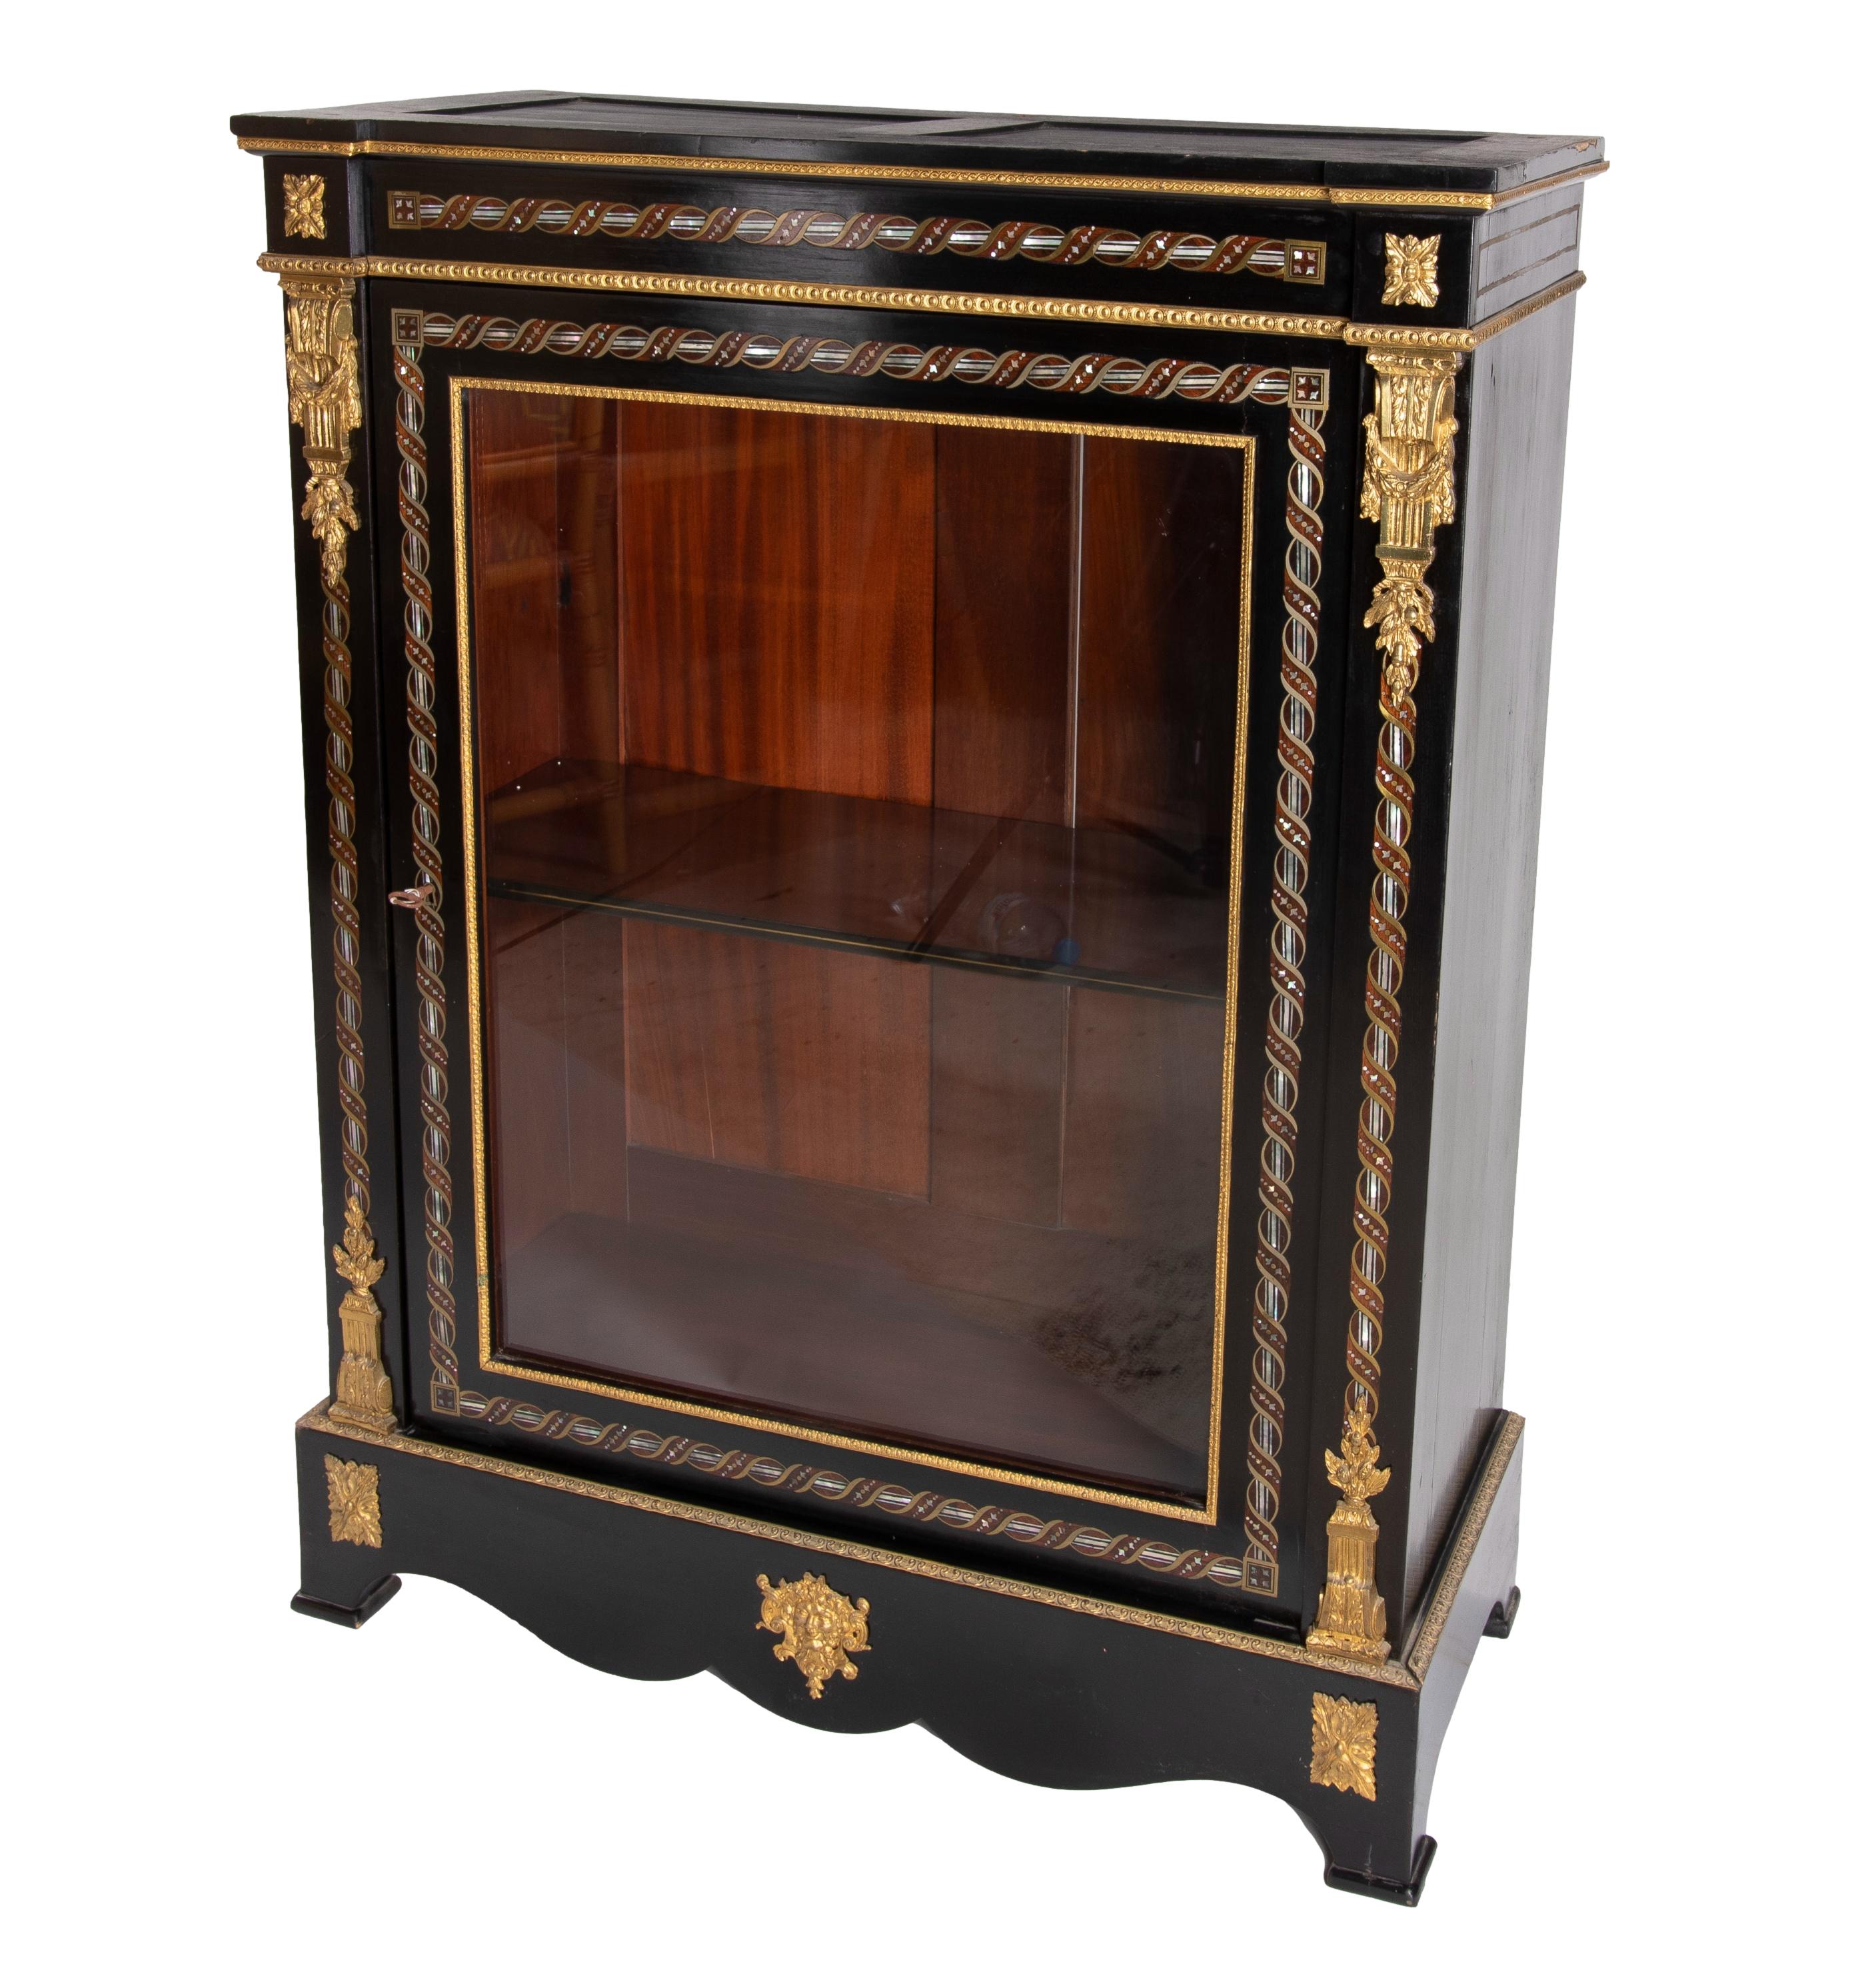 Antique 1850s French ionized wood pier cabinet with gilt bronze & mother of pearl inlay decoration.

Missing table top.